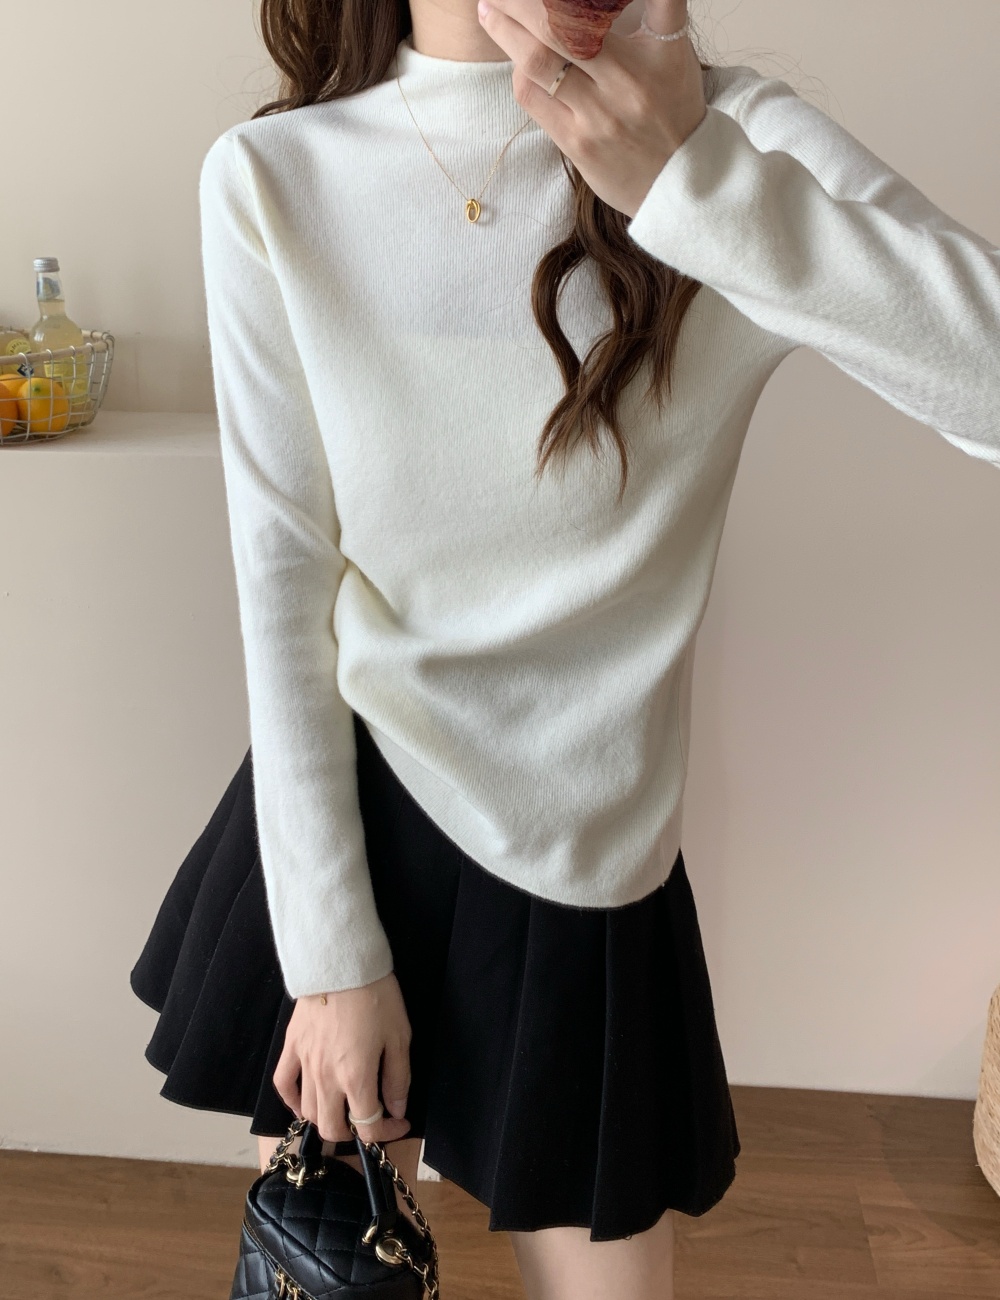 Slim Casual sweater pure Korean style bottoming shirt